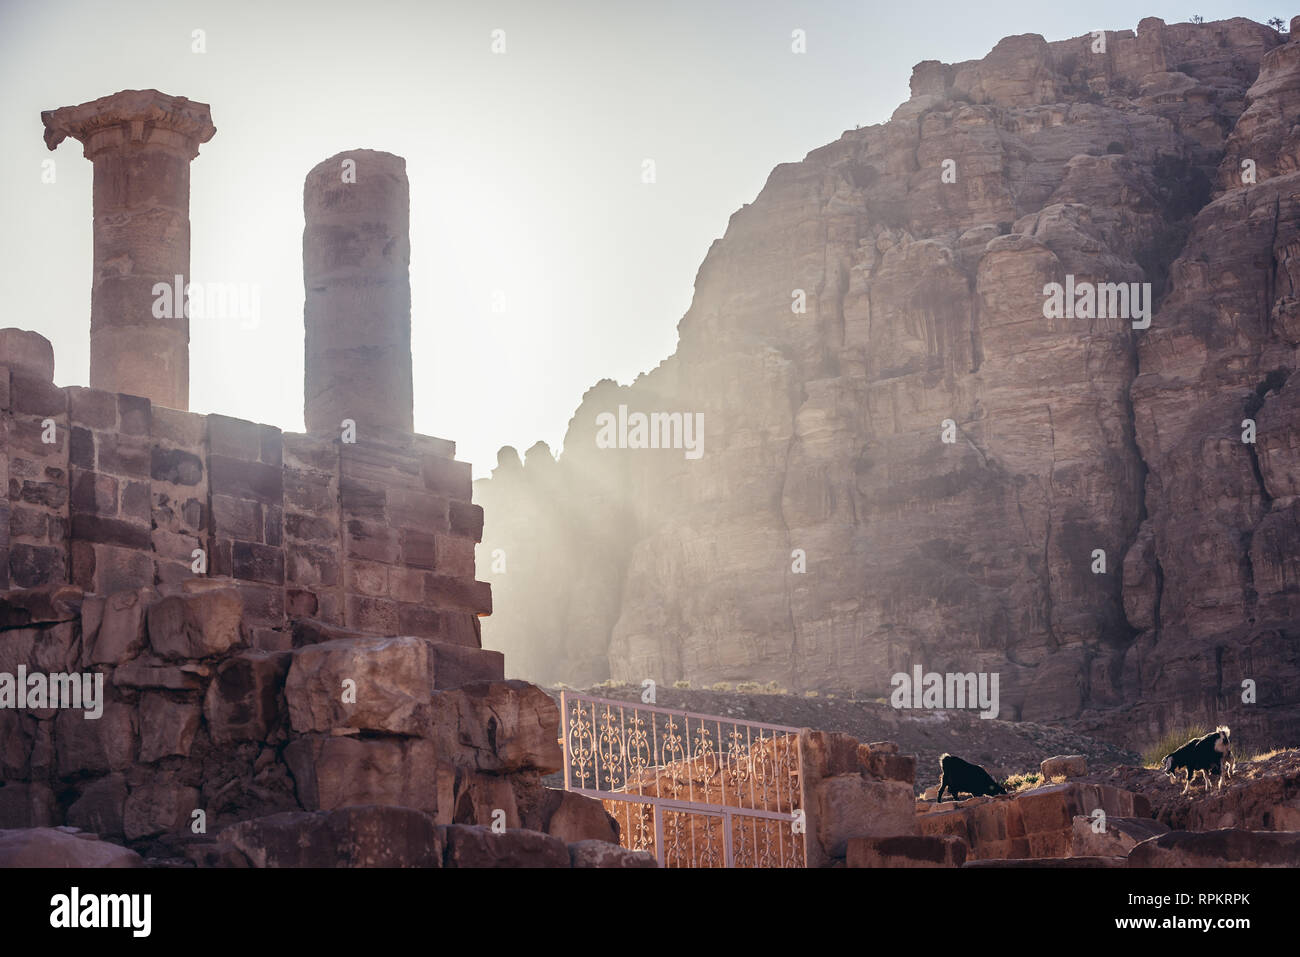 Ruins of Great Temple in Petra historical city of Nabatean Kingdom in Jordan Stock Photo